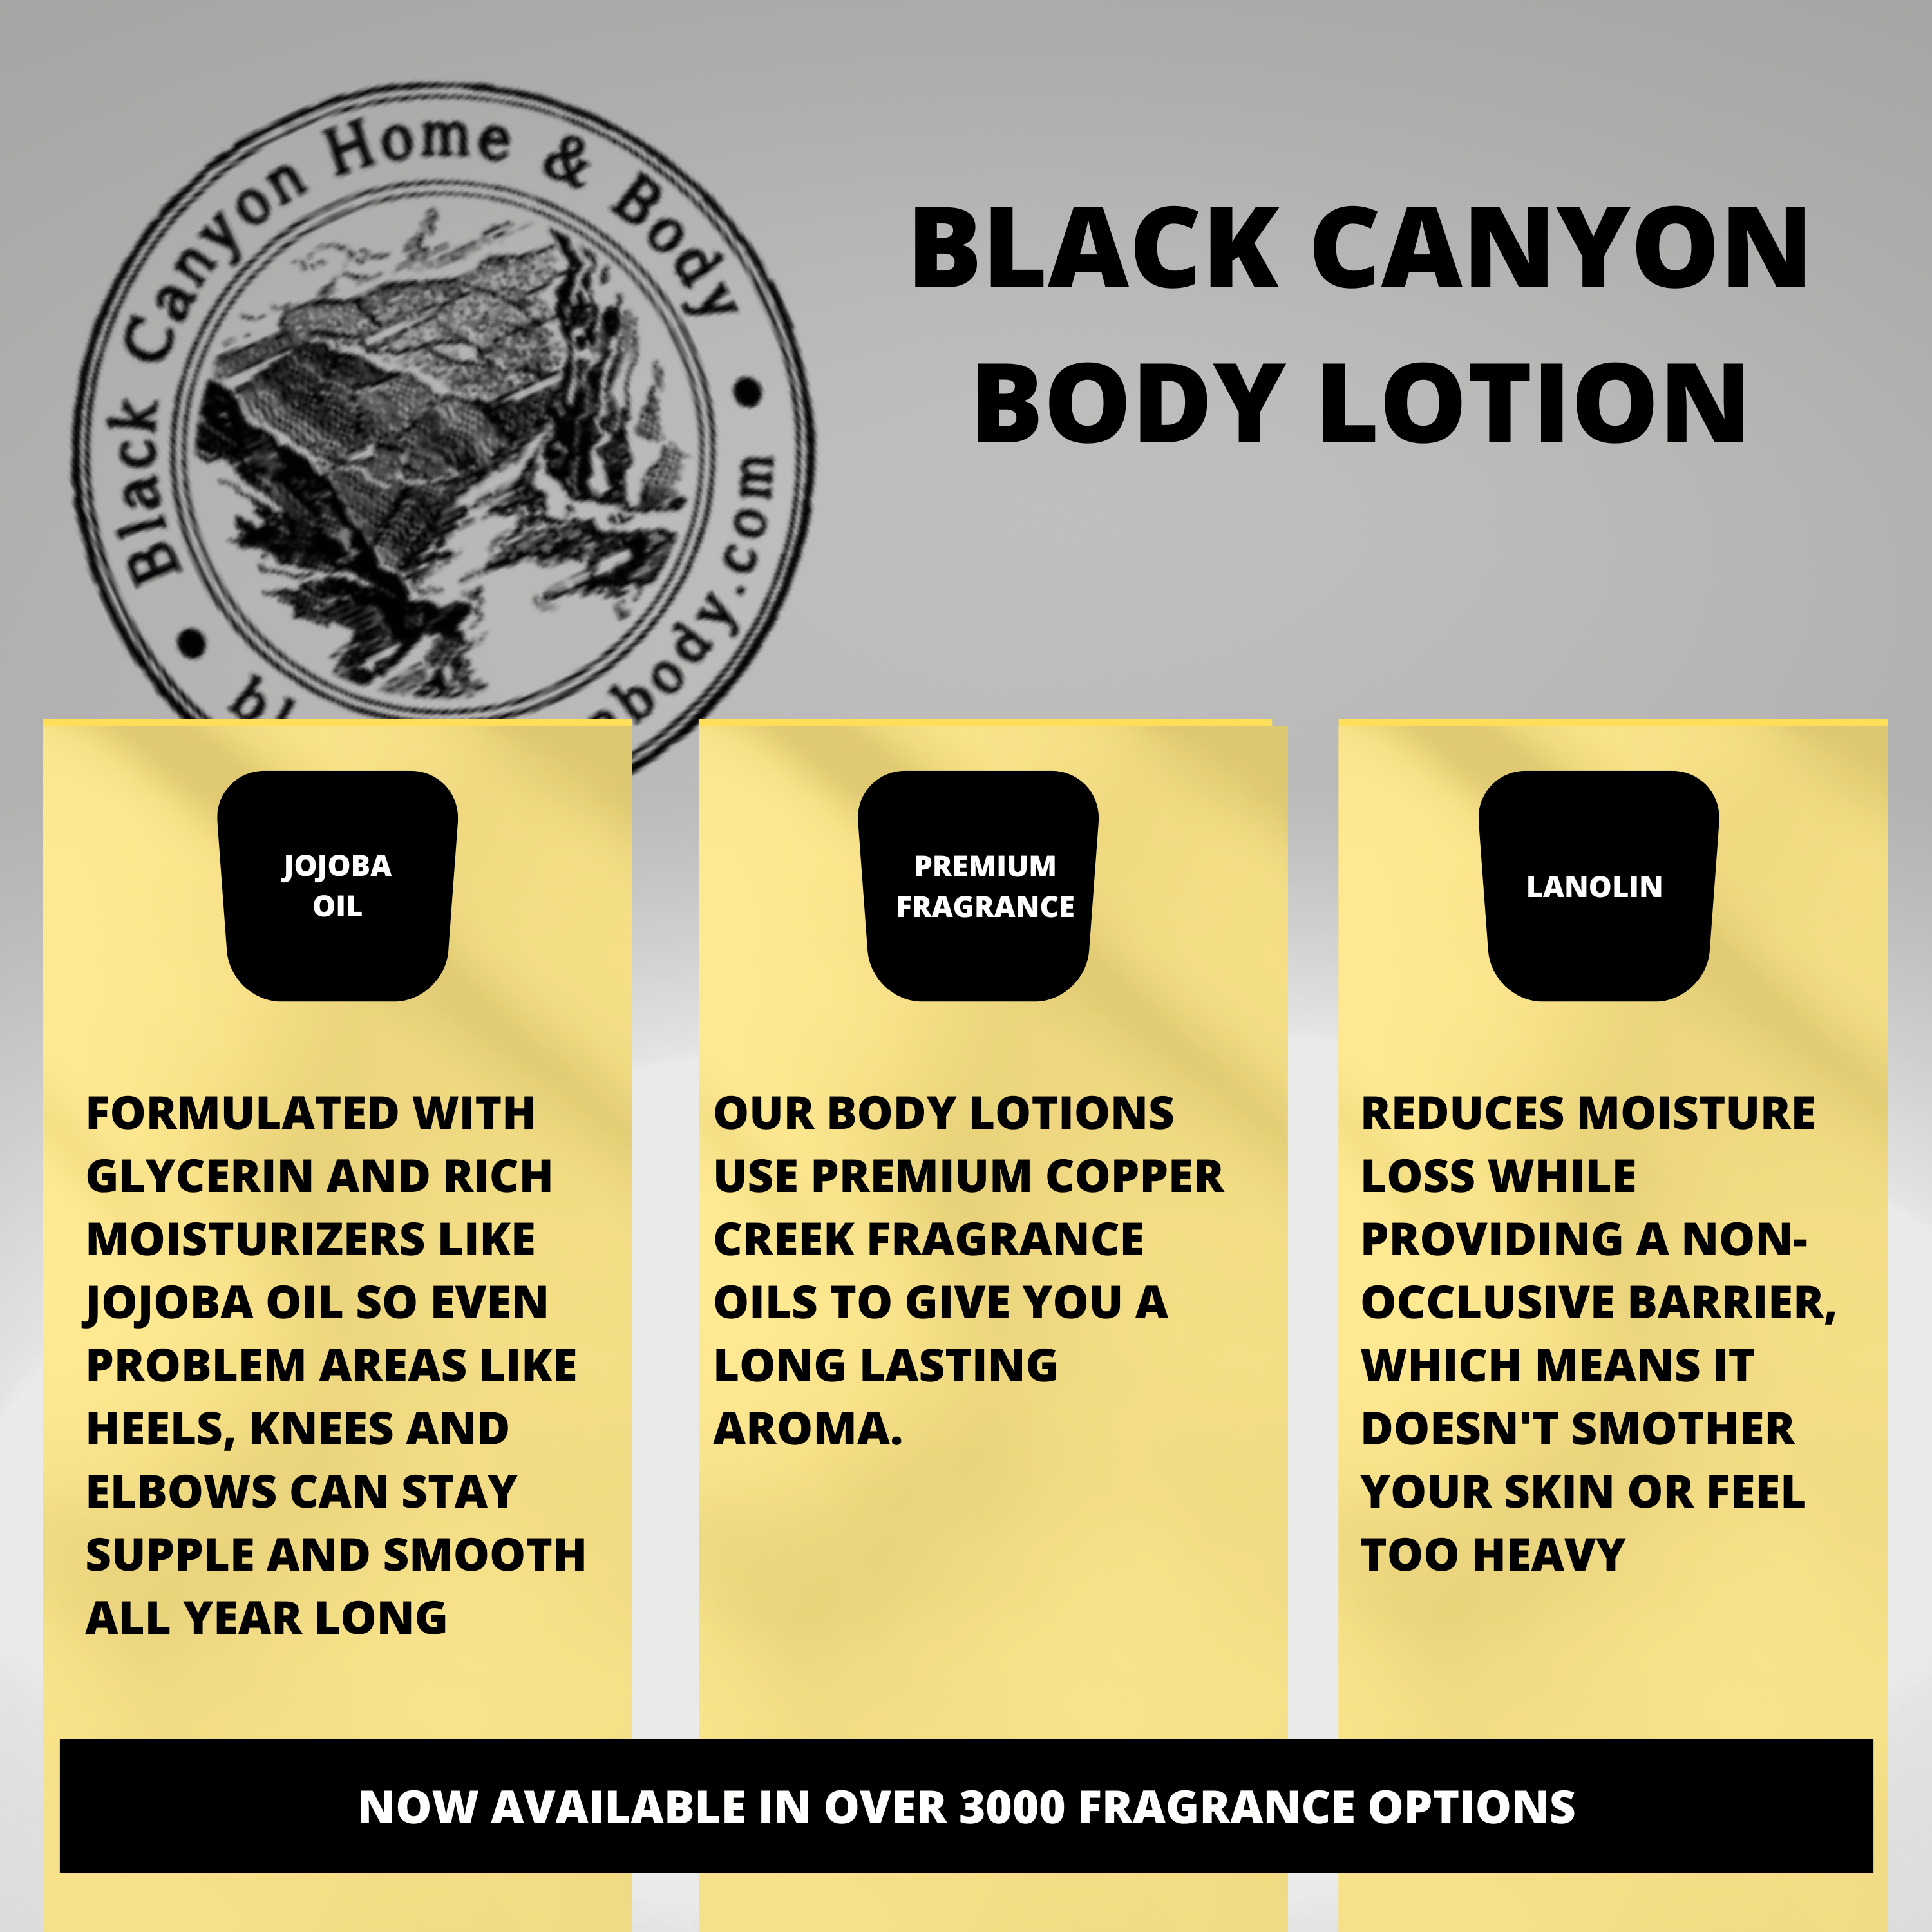 Black Canyon Juniper Berry Scented Luxury Body Lotion with Lanolin and Jojoba Oil